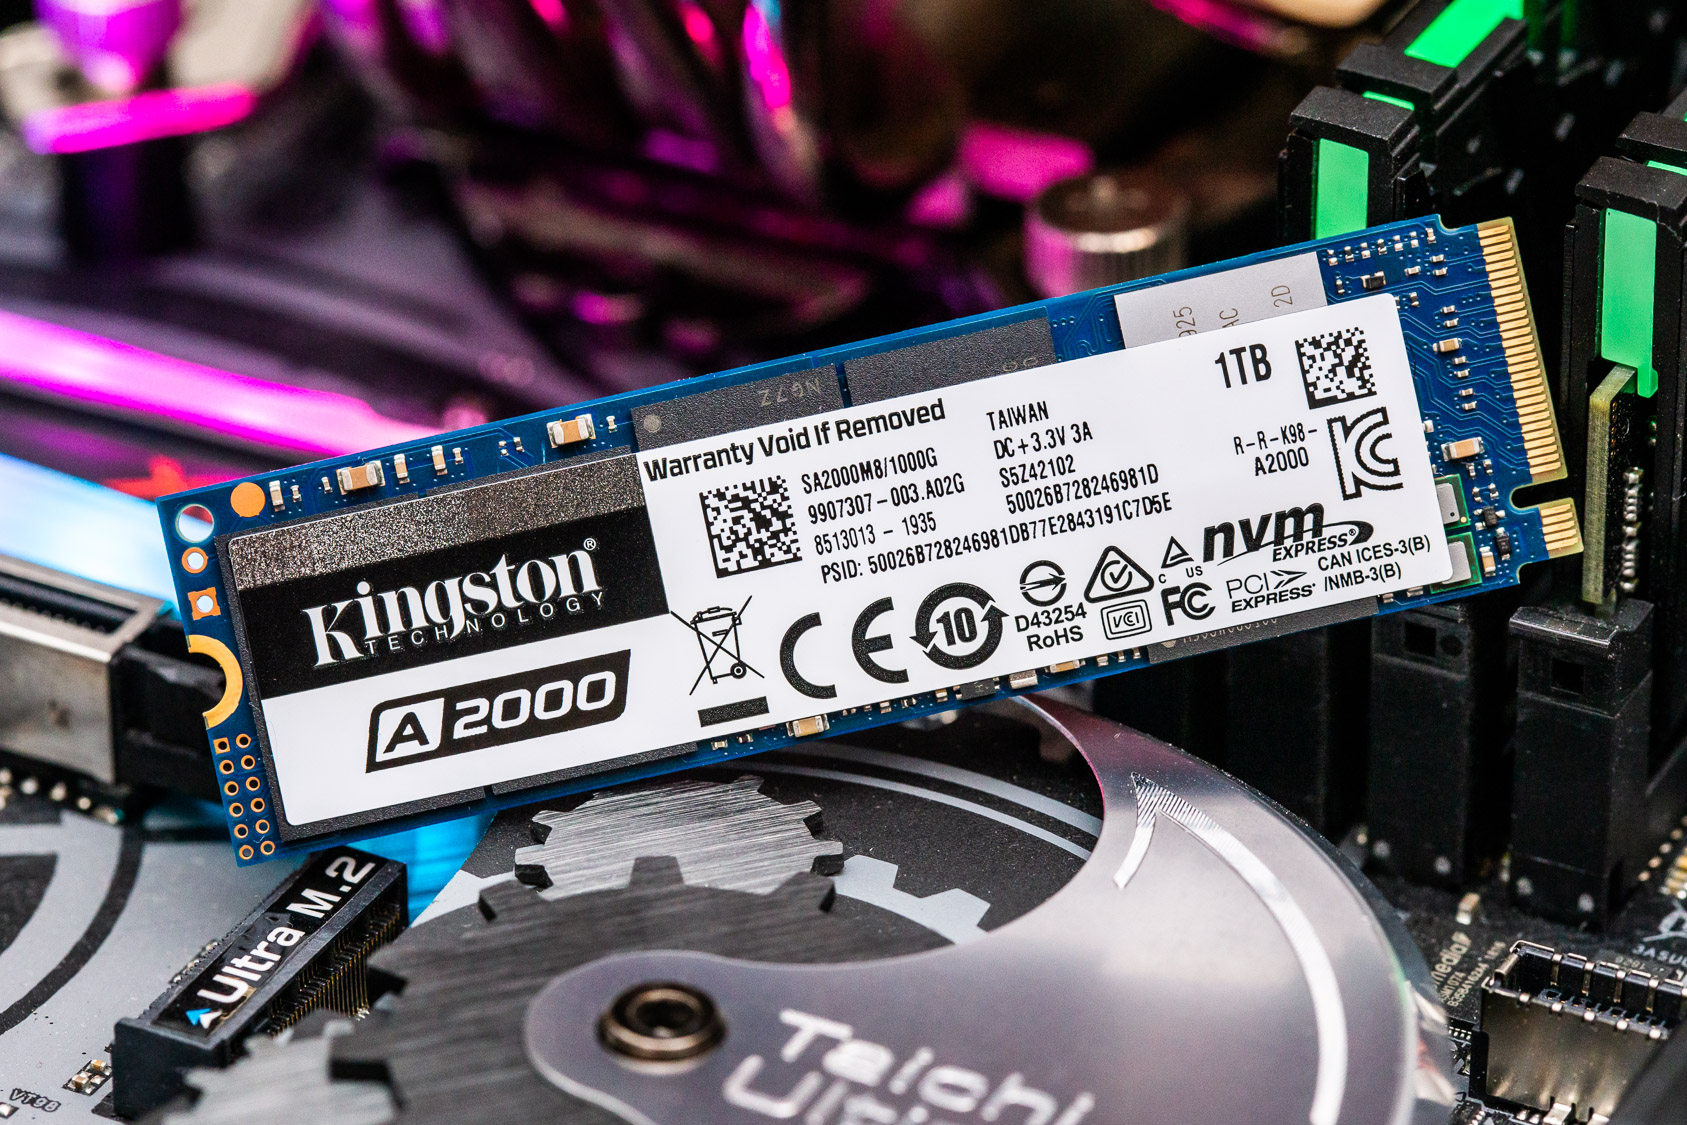 Proud Conquest TV set Kingston A2000 M.2 NVMe SSD Review: Security, Endurance, and Low Pricing |  Tom's Hardware